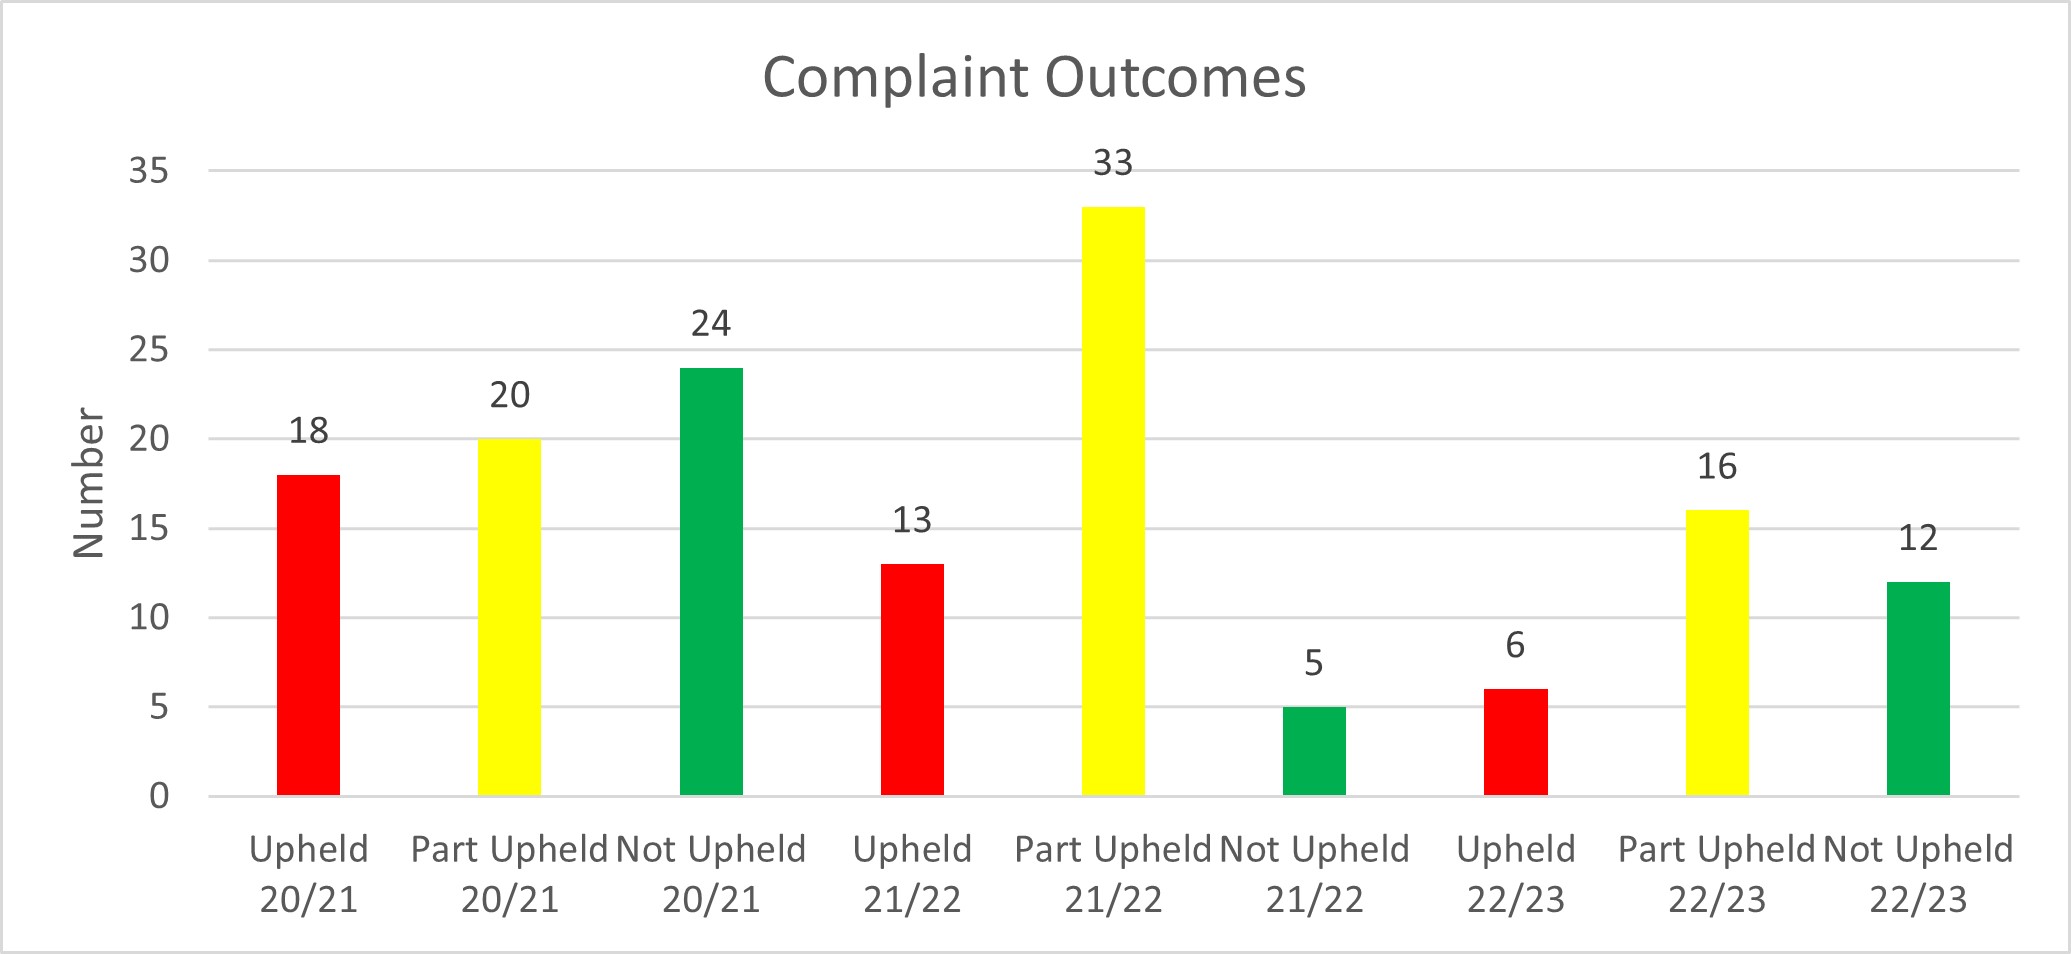 Graph Showing complaint outcomes (whether Upheld, Part Upheld or Not Upheld) over the last three years (2020-21 to 2022-23). 2020-2021: Upheld: 18, Part Upheld: 20, Not Upheld: 24. 2021-2022: Upheld: 13, Part Upheld: 33, Not Upheld: 5. 2022-2023: Upheld: 6, part Upheld, 16, Not Upheld: 12.